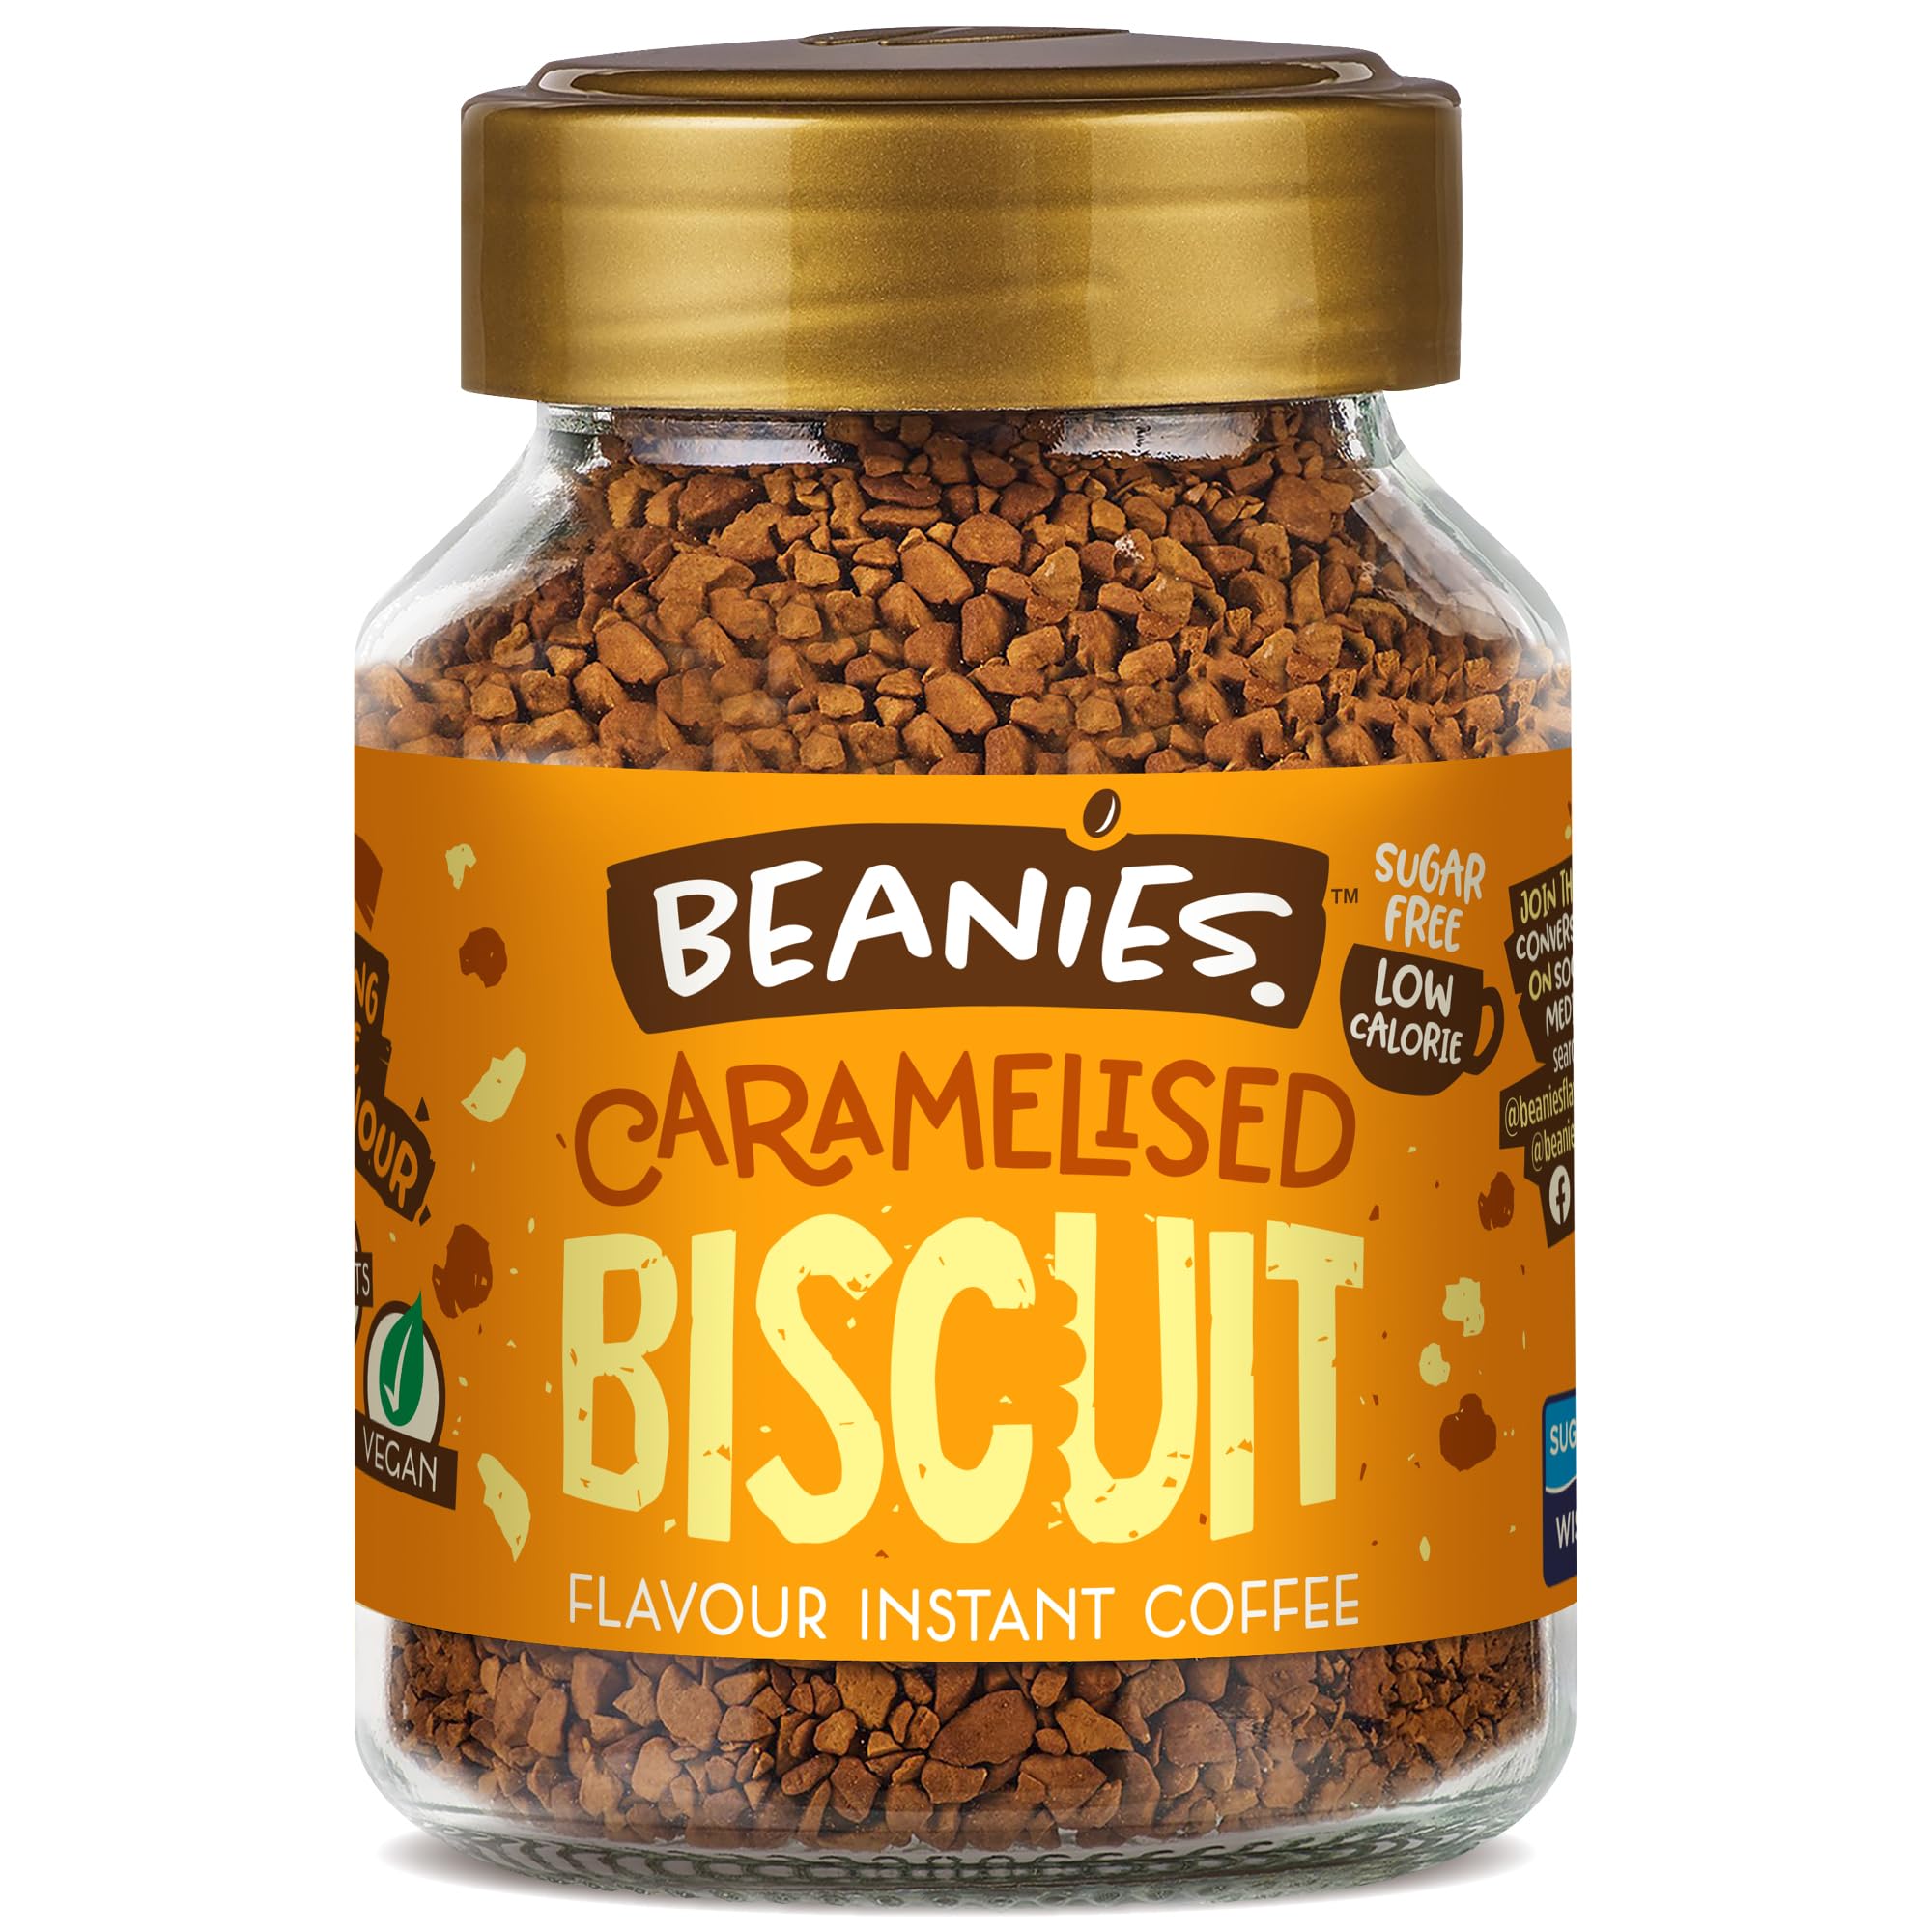 Beanies Caramelized Biscuit Coffee 50g